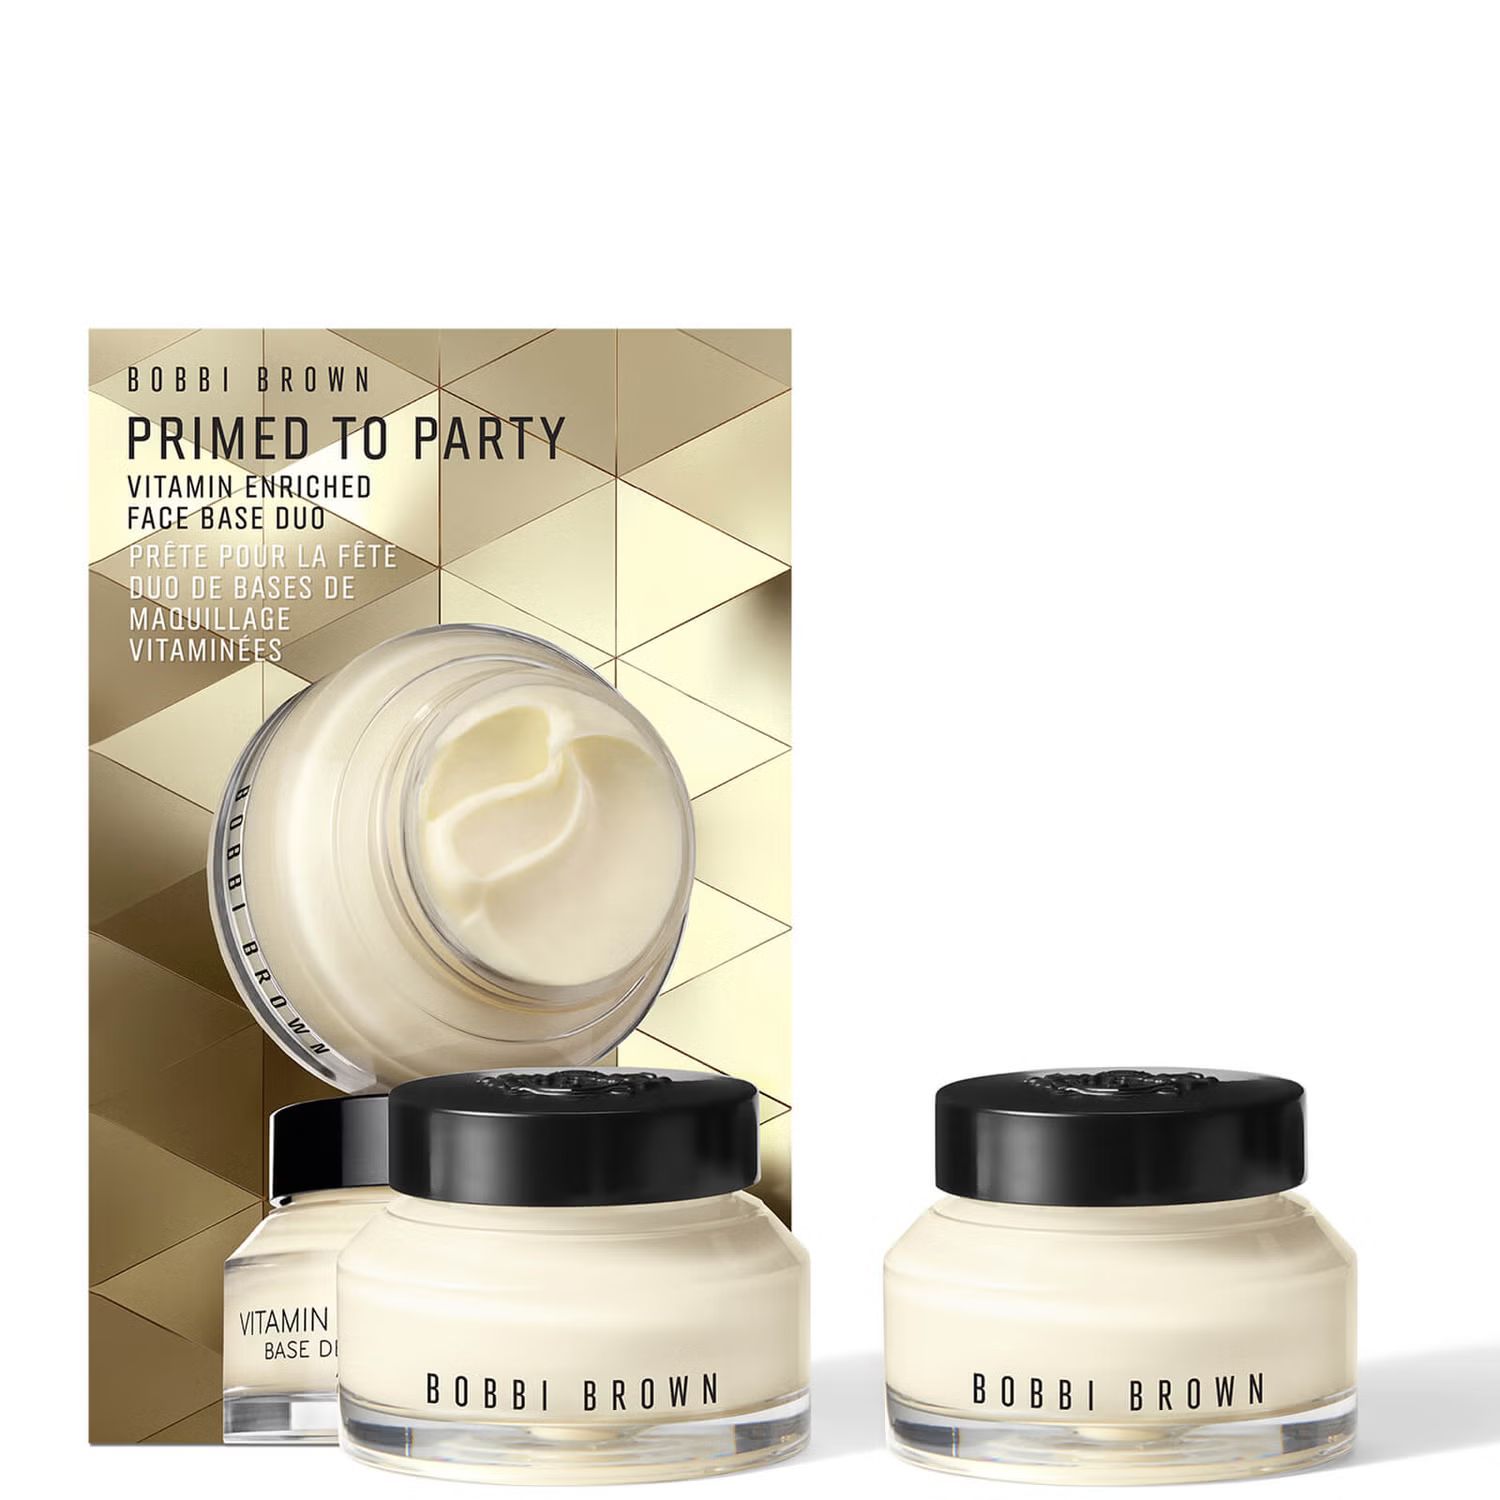 Bobbi Brown Primed to Party Vitamin Enriched Face Base Duo (Worth £104.00) | Look Fantastic (ROW)